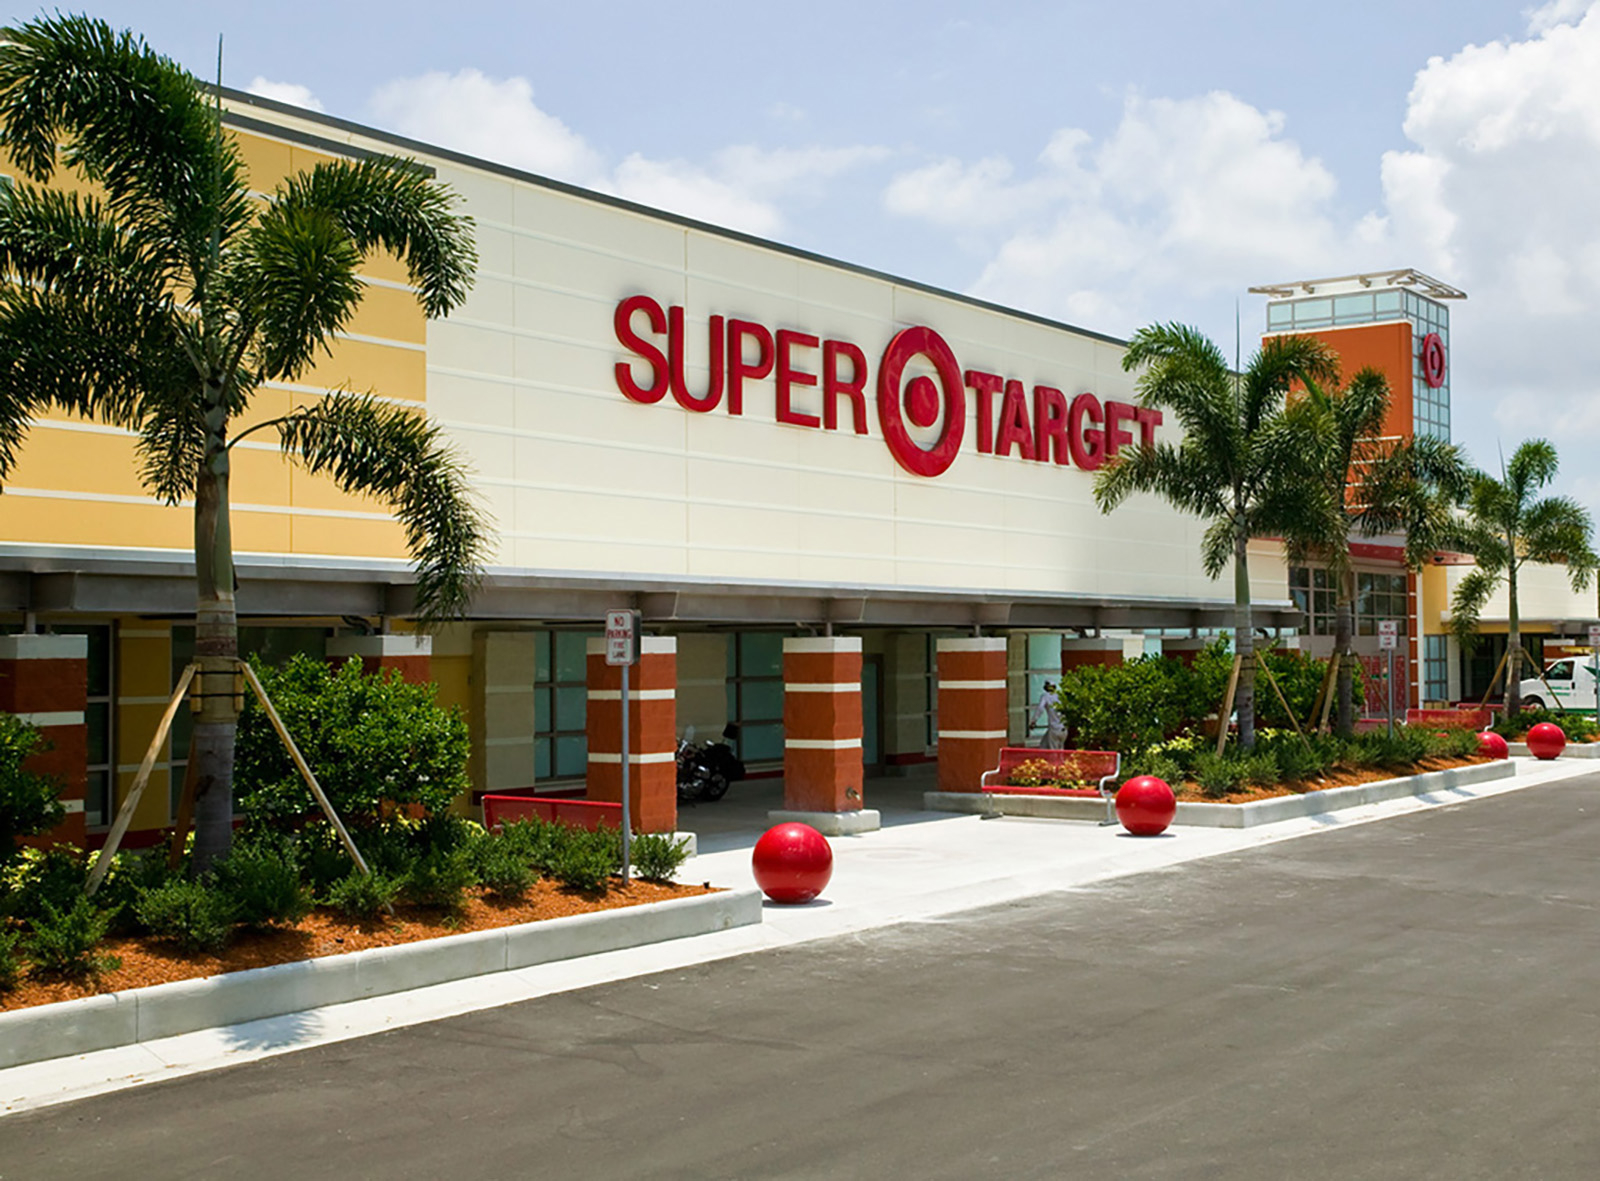 What is a Super Target?